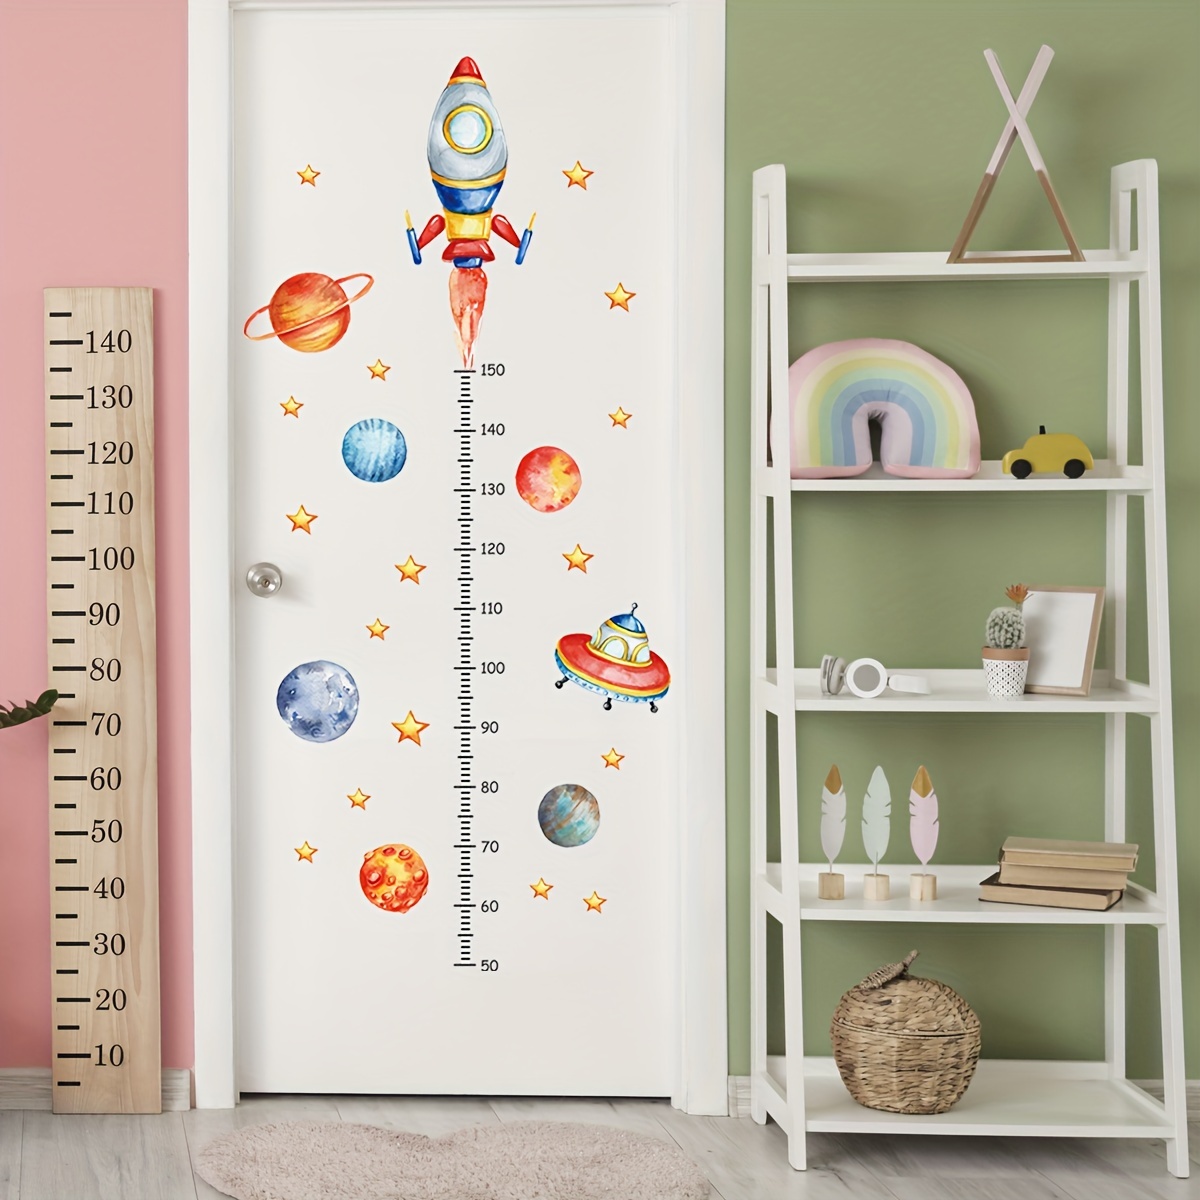 

1pc Self-adhesive Height Chart Wall Sticker, Cartoon Planet Star Rocket Pattern Growth Chart Sticker, Growth Measuring Ruler, Bedroom Home Wall Decoration